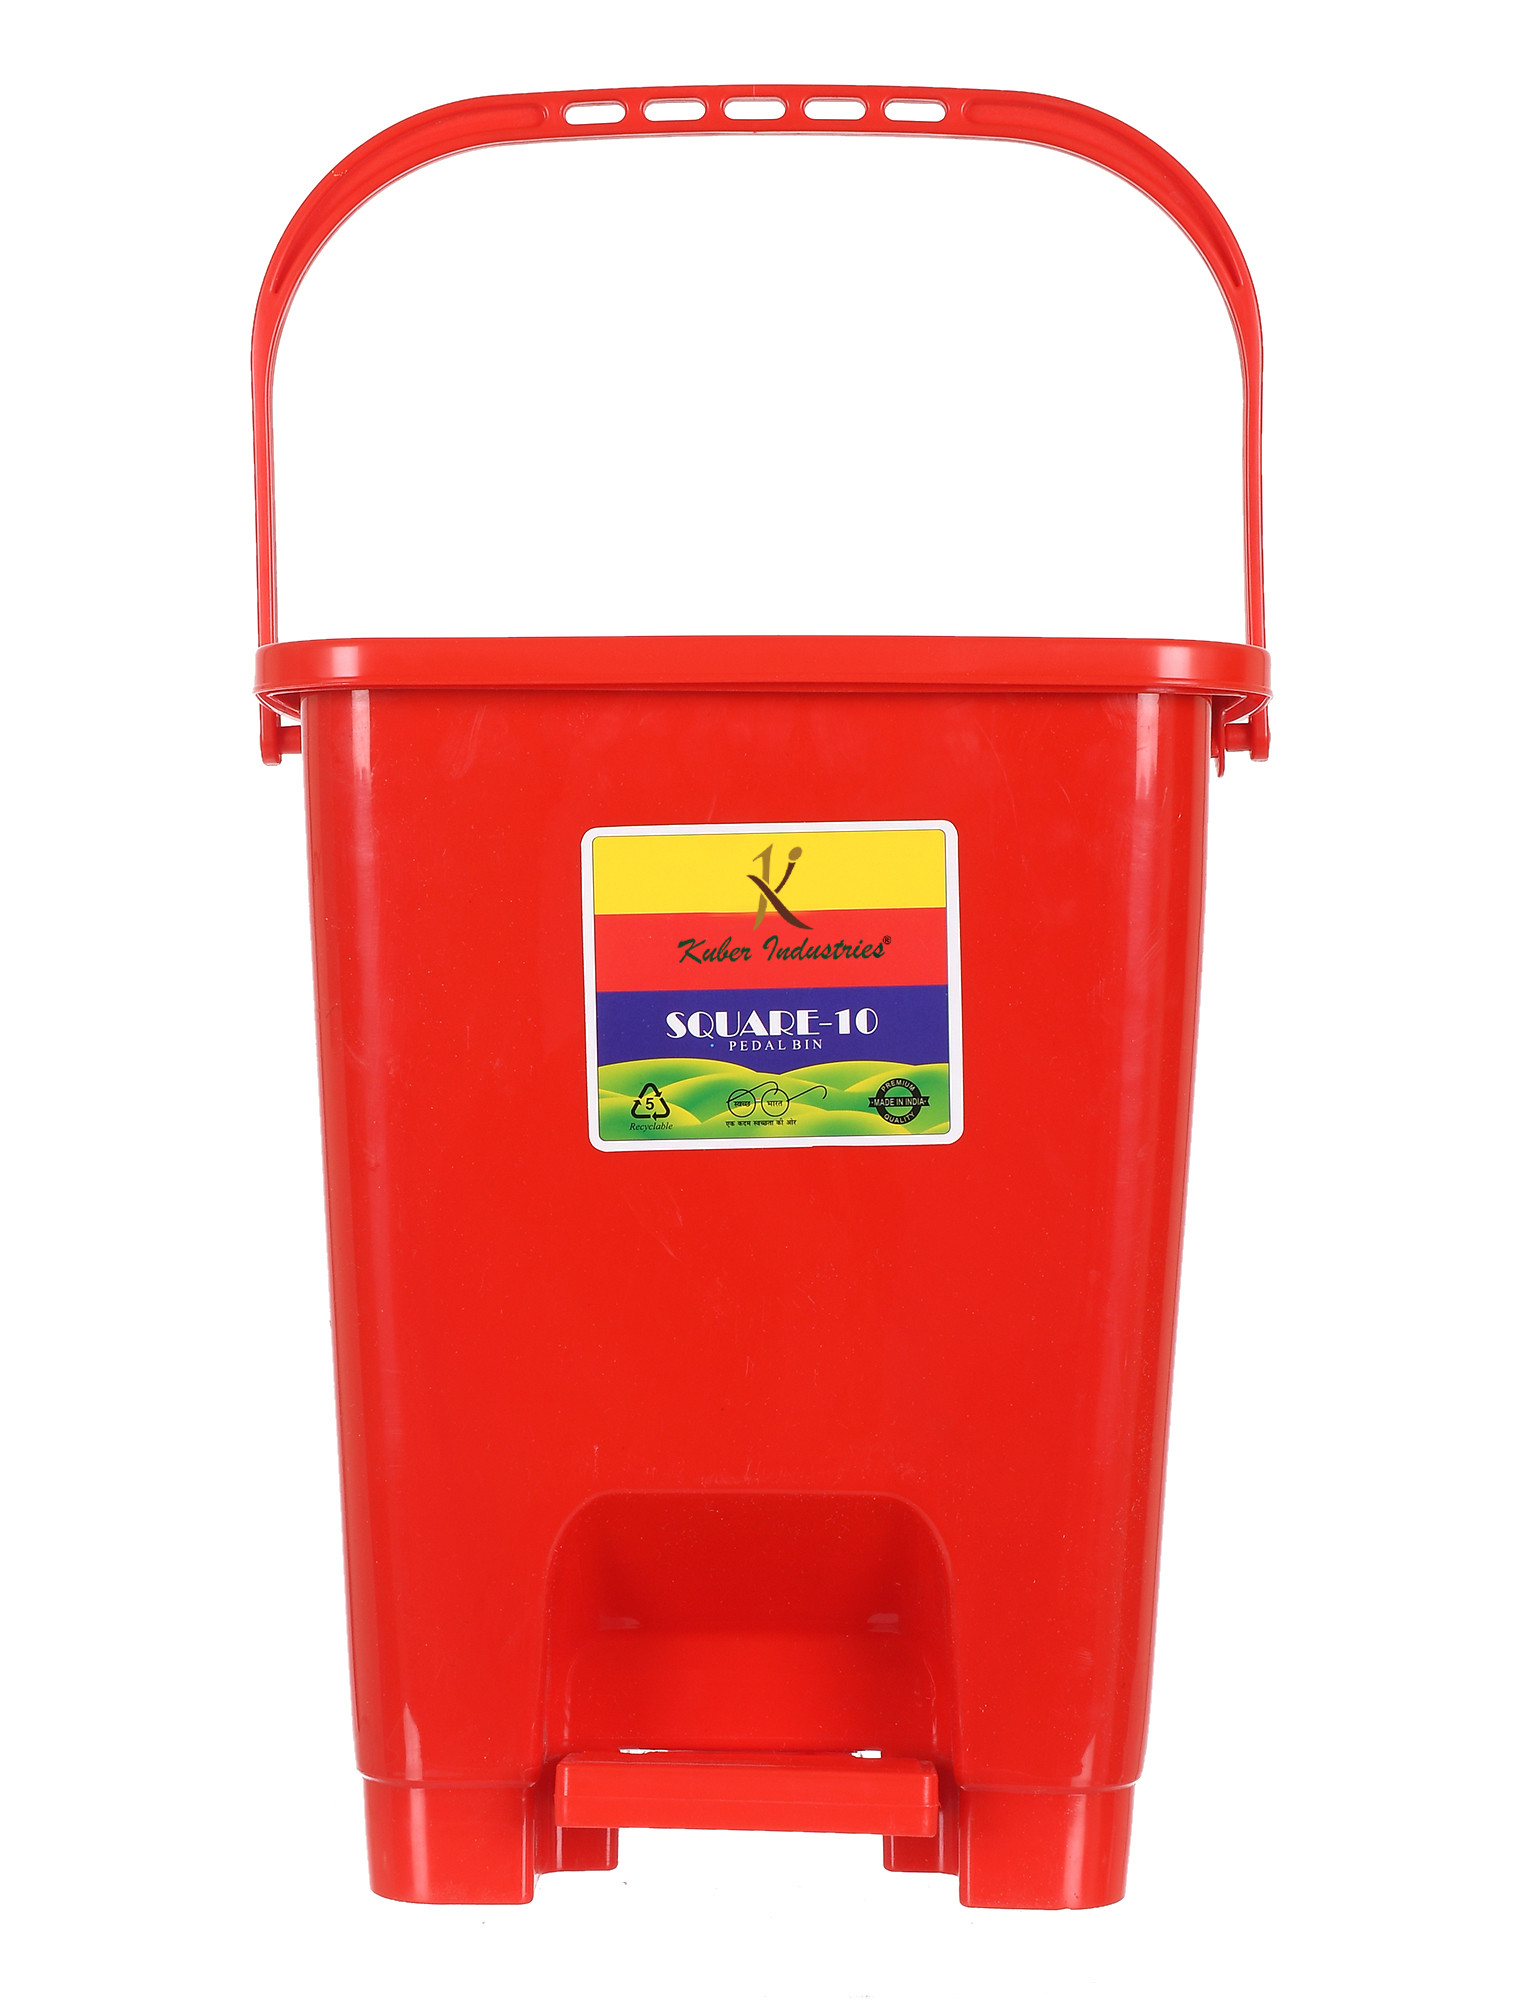 Kuber Industries Premium Plastic Pedal Dustbin 10 Ltr (Green & Red & Blue)-Pack of 3